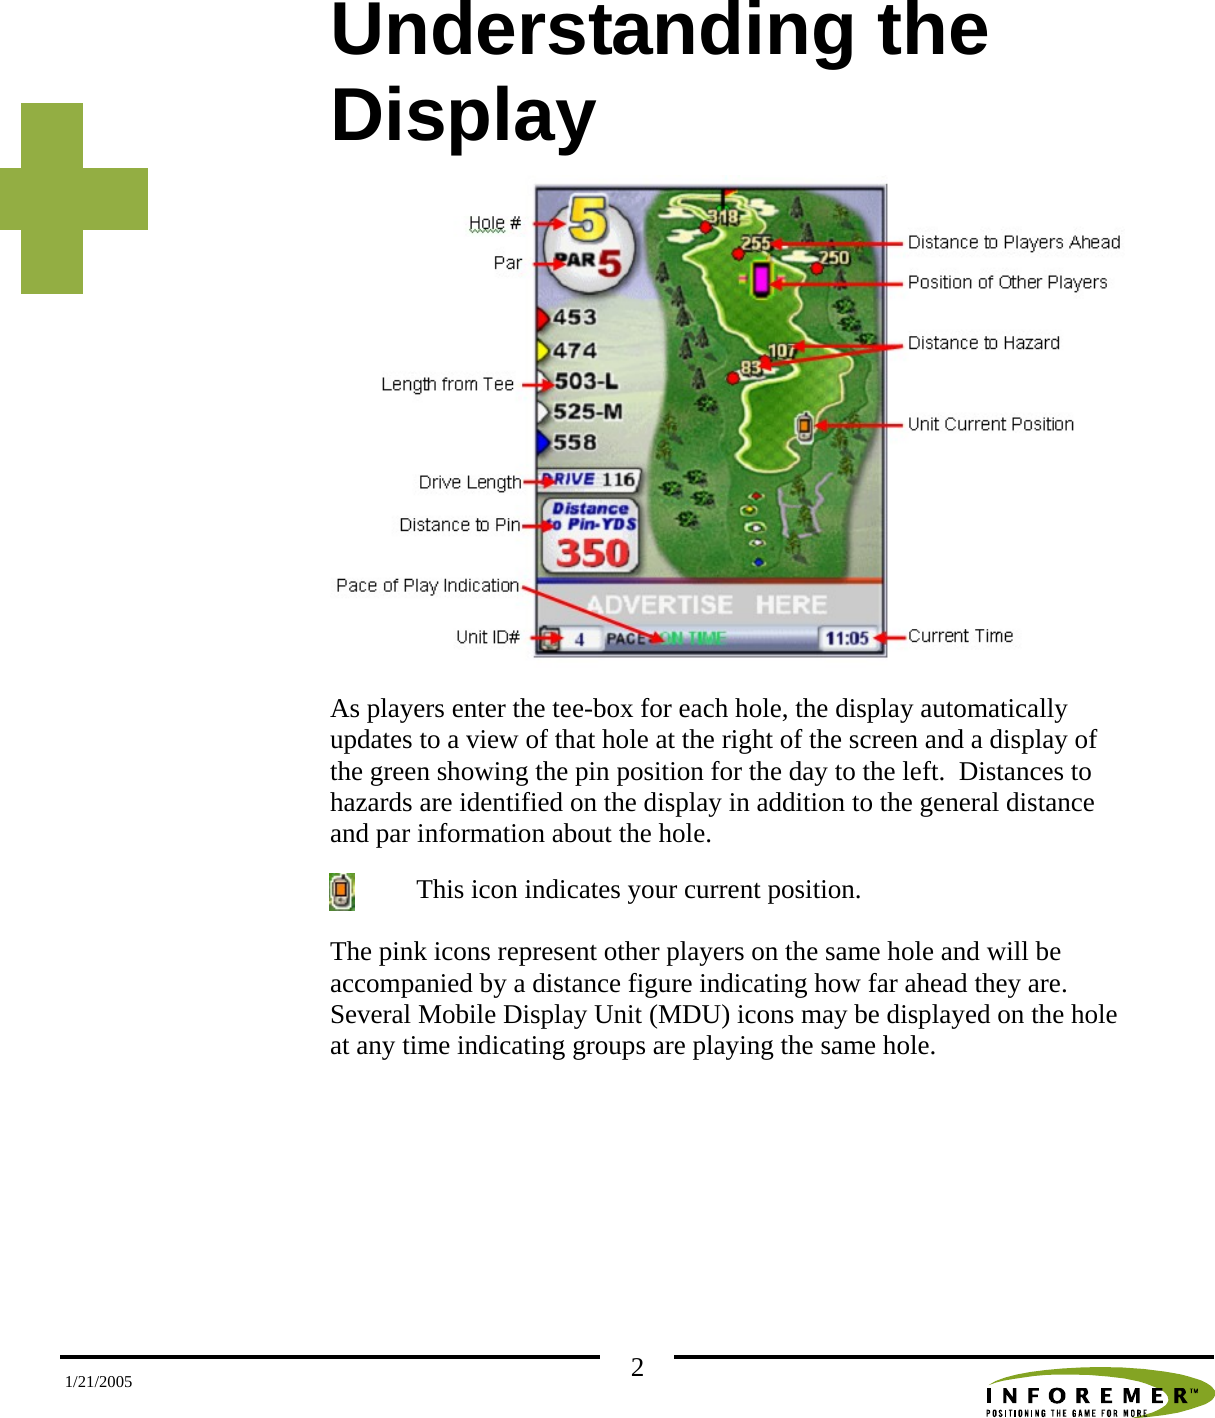   21/21/2005 Understanding the Display  As players enter the tee-box for each hole, the display automatically updates to a view of that hole at the right of the screen and a display of the green showing the pin position for the day to the left.  Distances to hazards are identified on the display in addition to the general distance and par information about the hole.      This icon indicates your current position. The pink icons represent other players on the same hole and will be accompanied by a distance figure indicating how far ahead they are.  Several Mobile Display Unit (MDU) icons may be displayed on the hole at any time indicating groups are playing the same hole. 